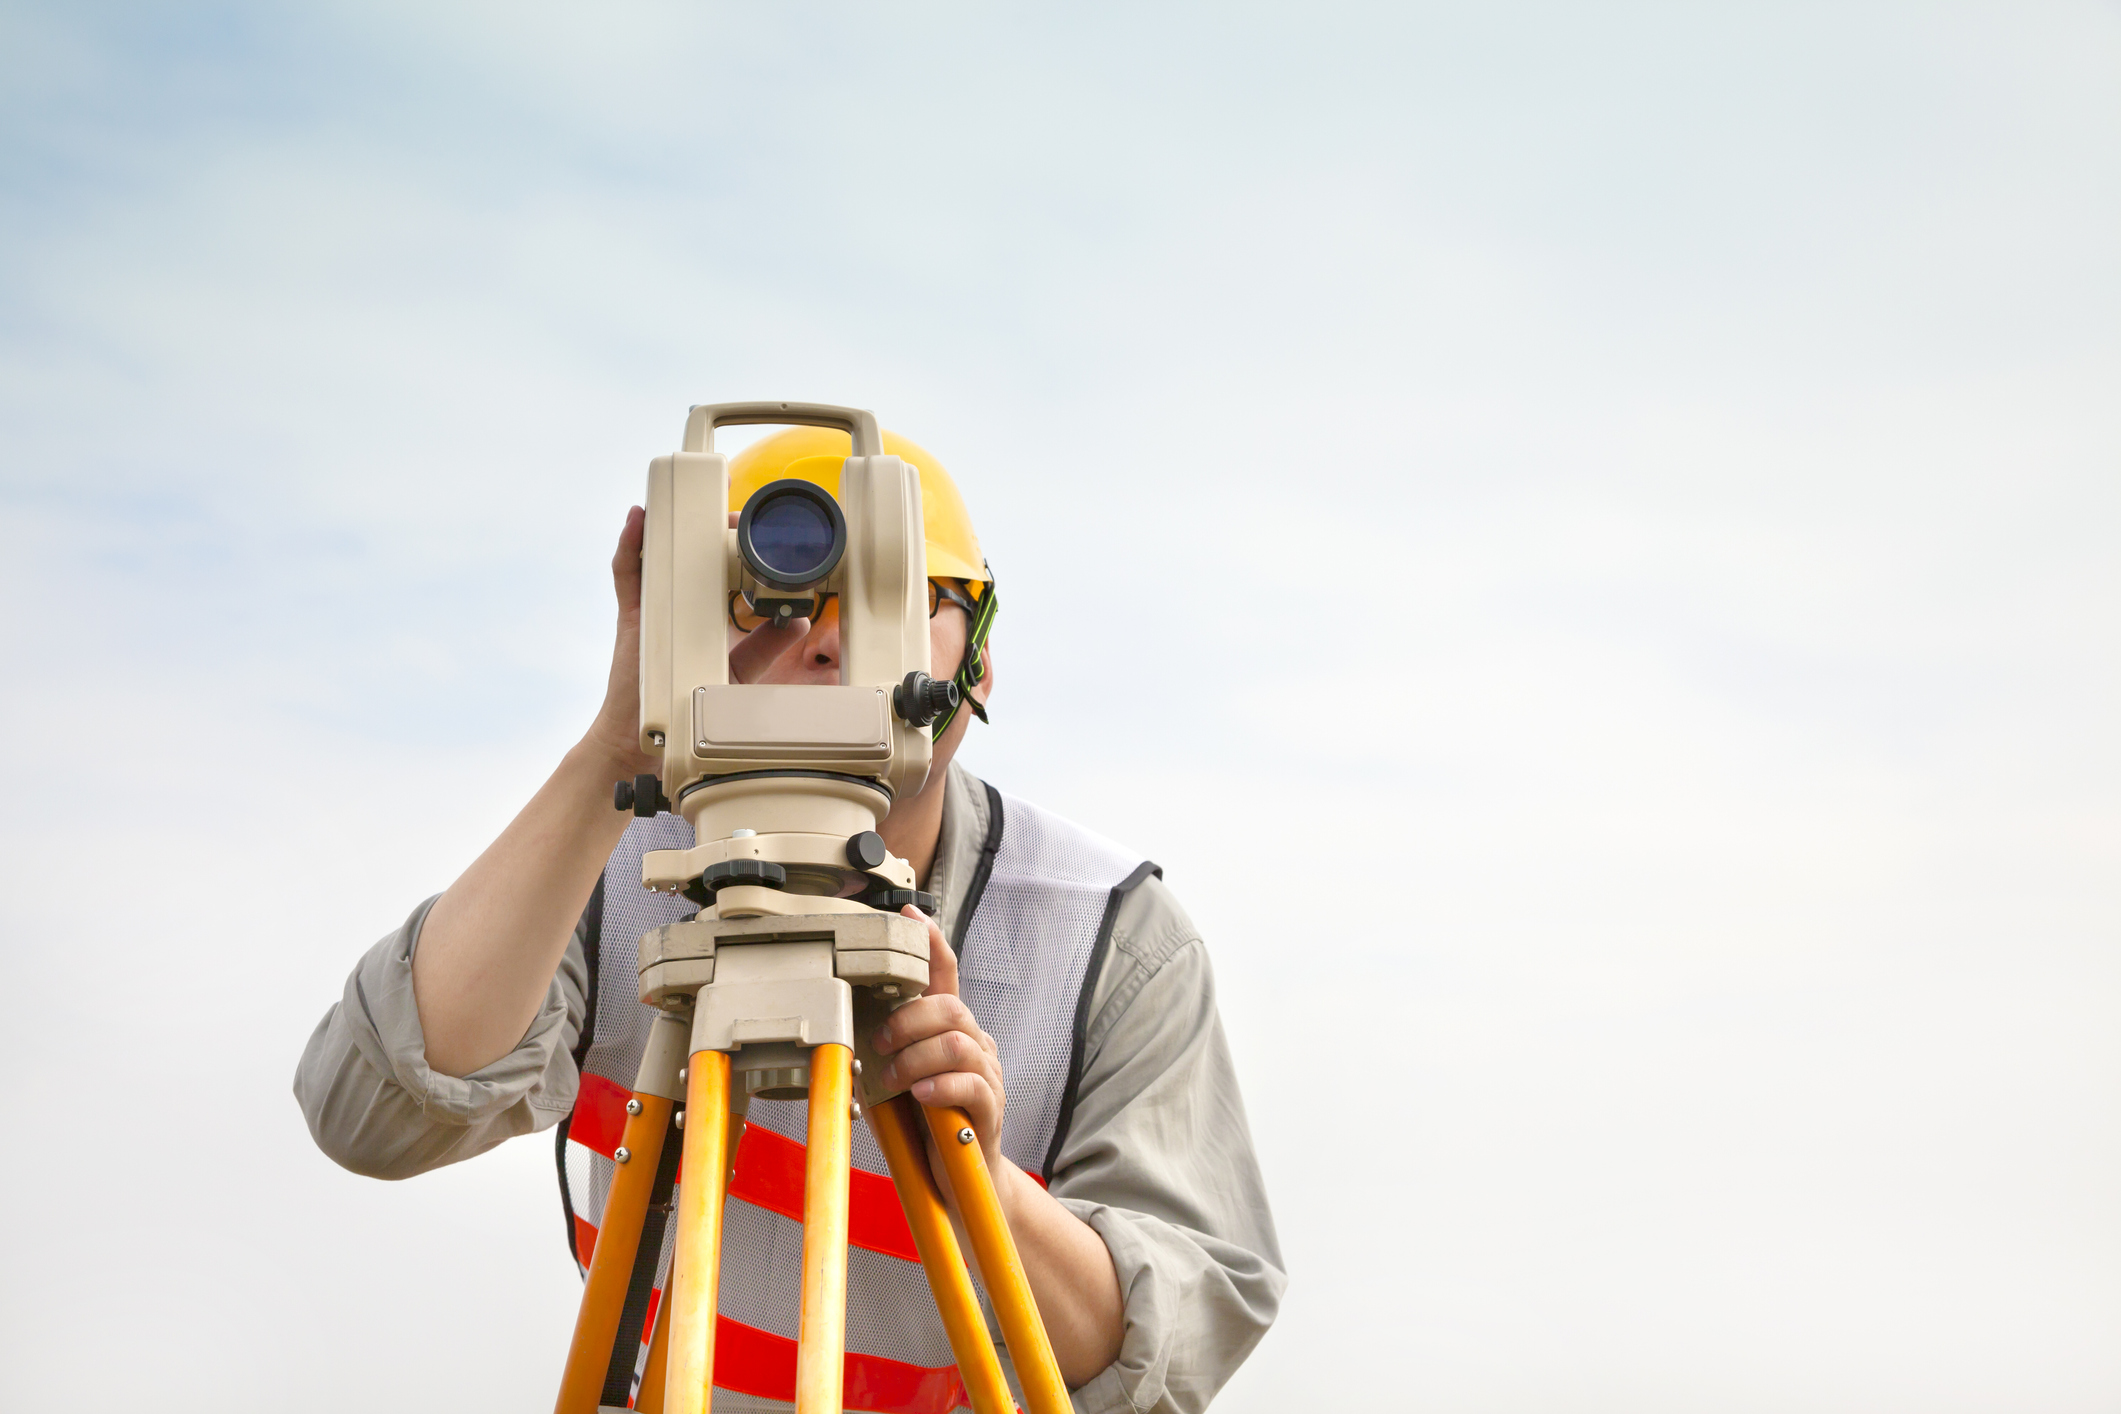 Construction Technology Topics: How Is BIM Used in Surveying?